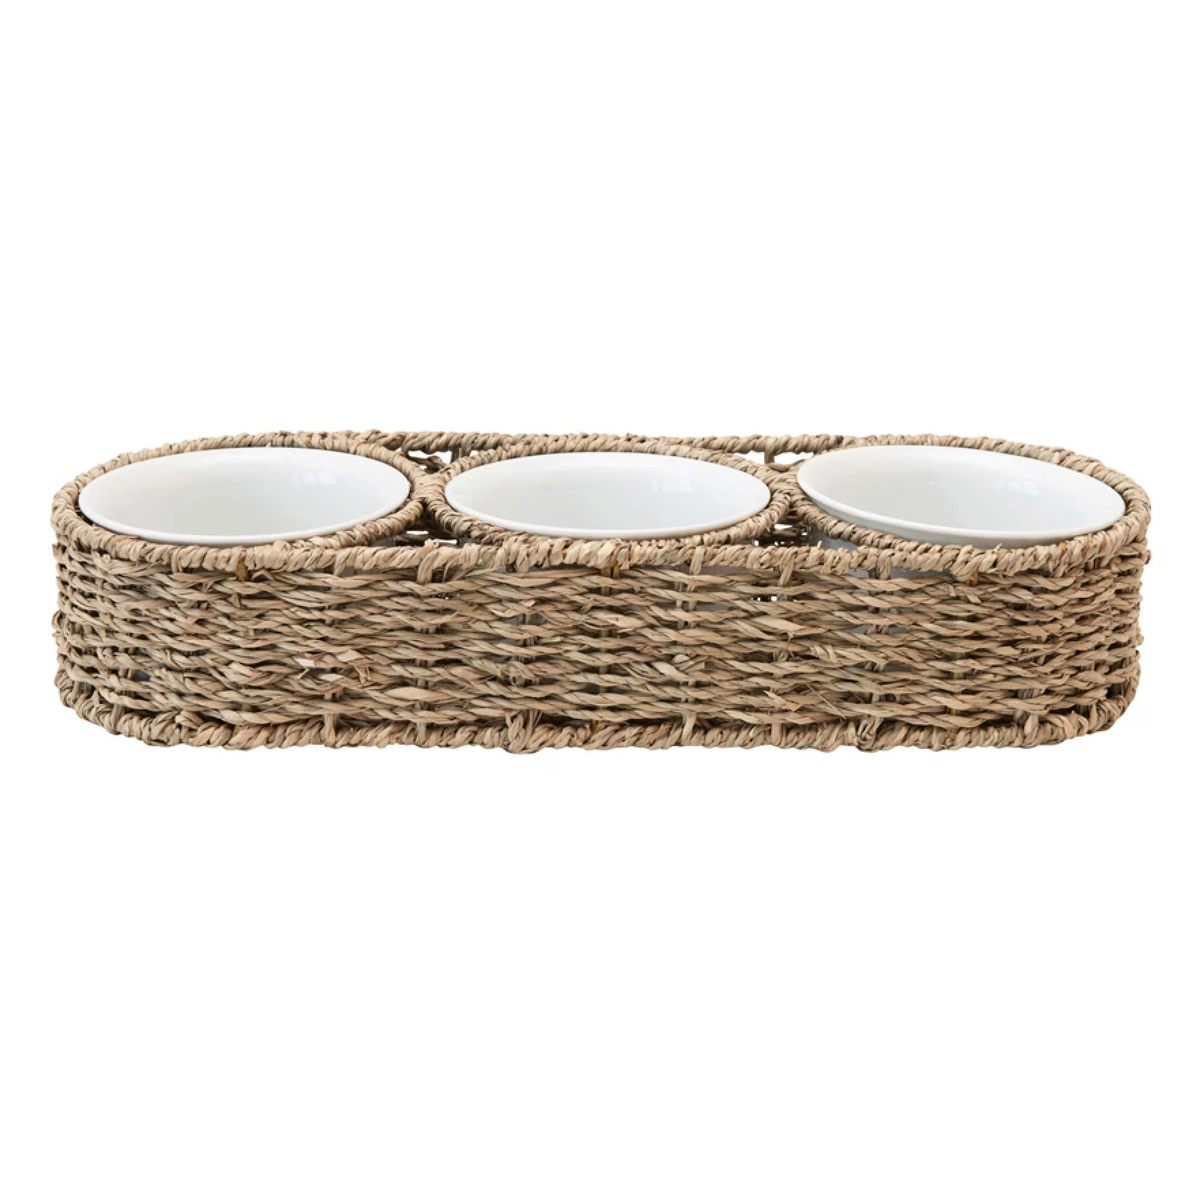 Hand Woven Basket with Ceramic Bowl